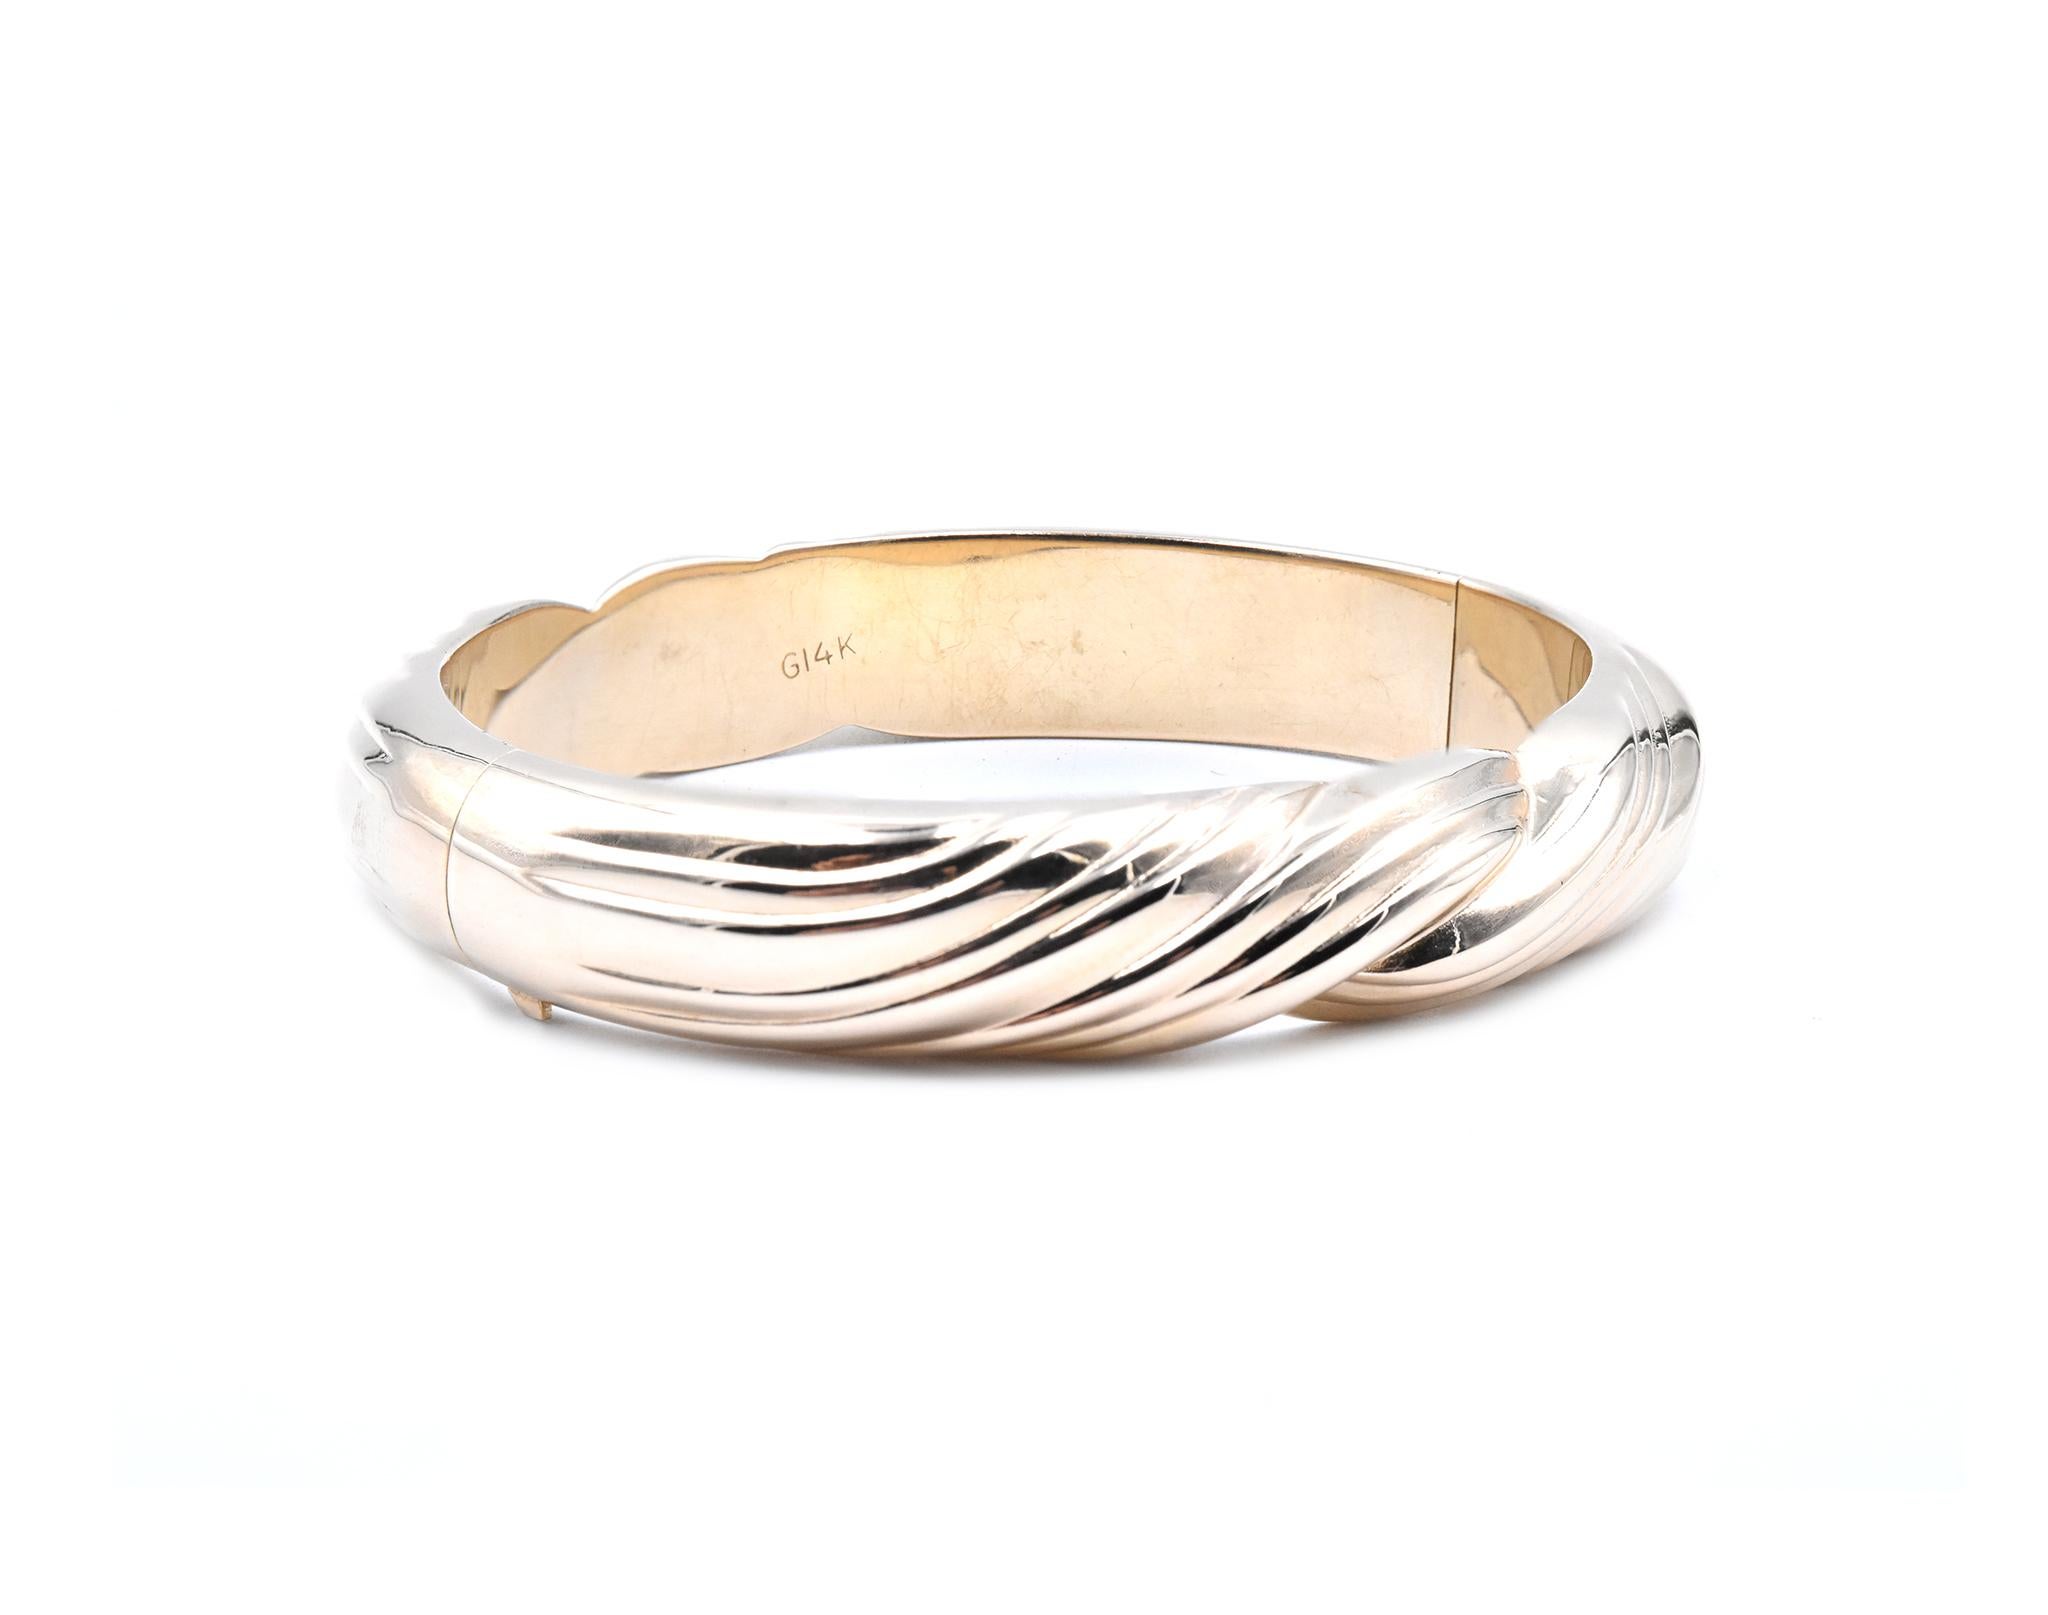 Designer: custom
Material: 18k yellow gold
Dimensions: the bracelet will fit up to a 7-inch wrist
Weight: 17.97 grams
